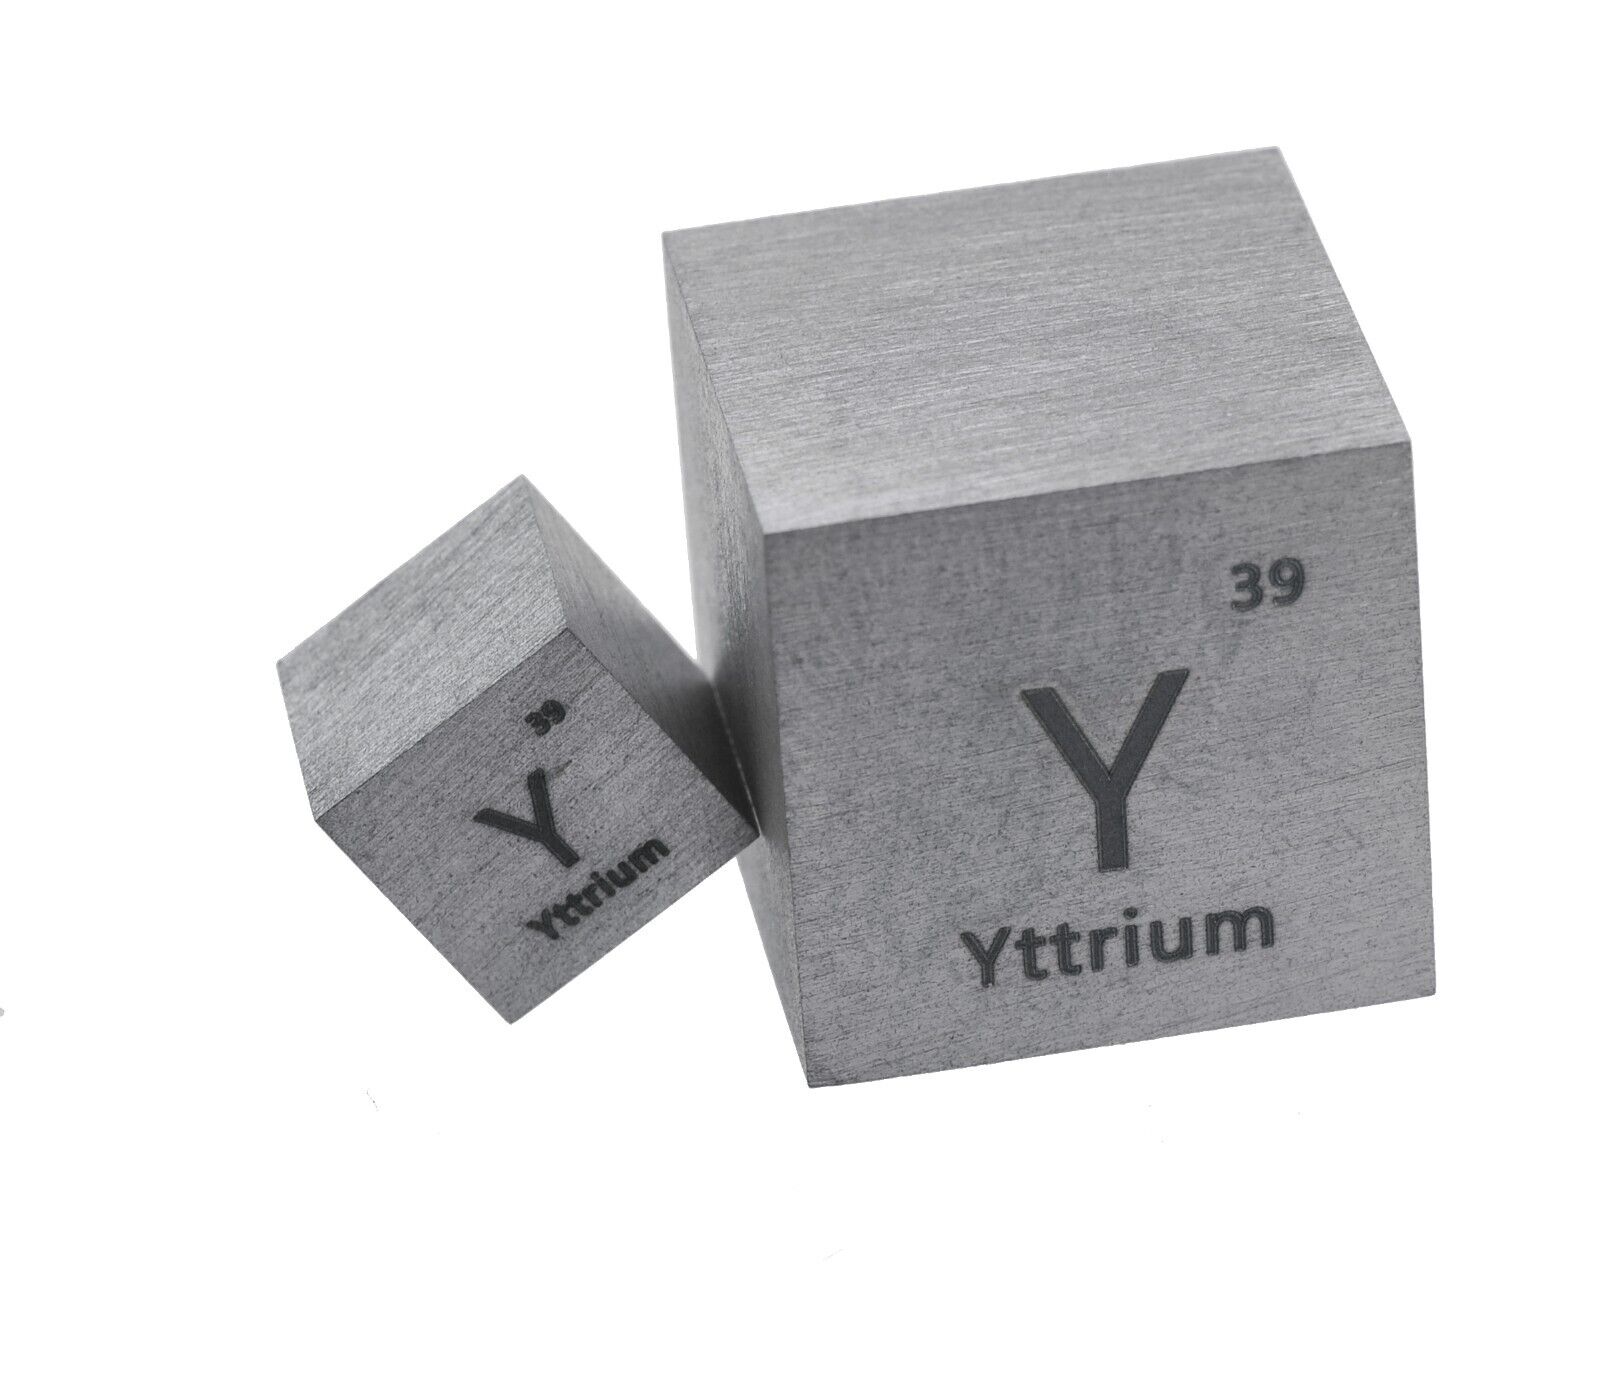 Yttrium Metal 10mm Density Cube 99.95% for Element Collection USA SHIPPING